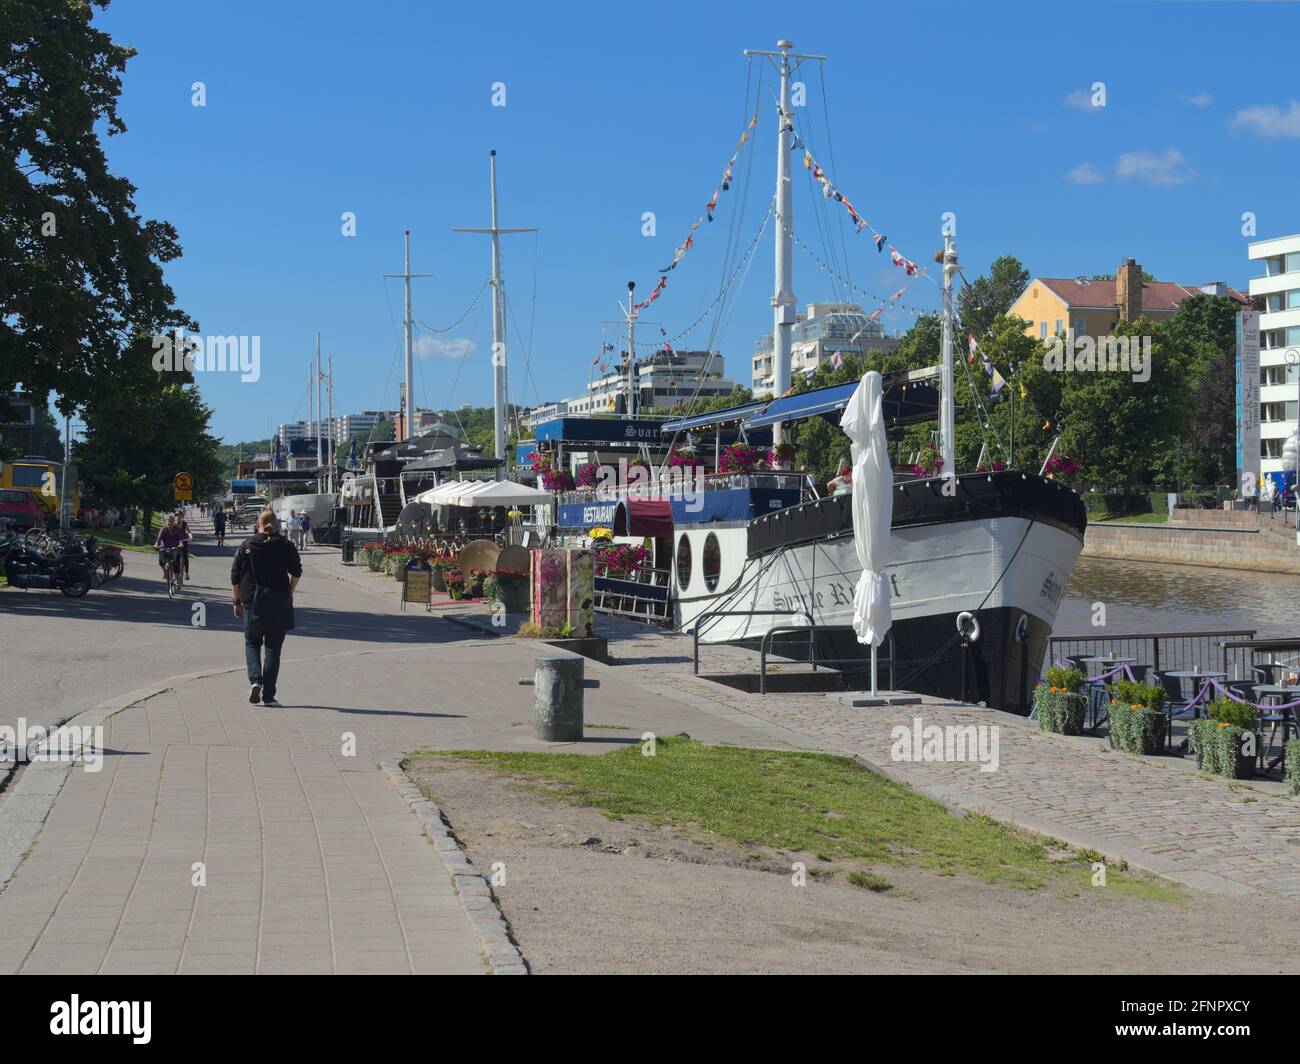 Svarte Rudolf and other restaurant ships docked in river Aura in Turku, Finland on a sunny summer day Stock Photo